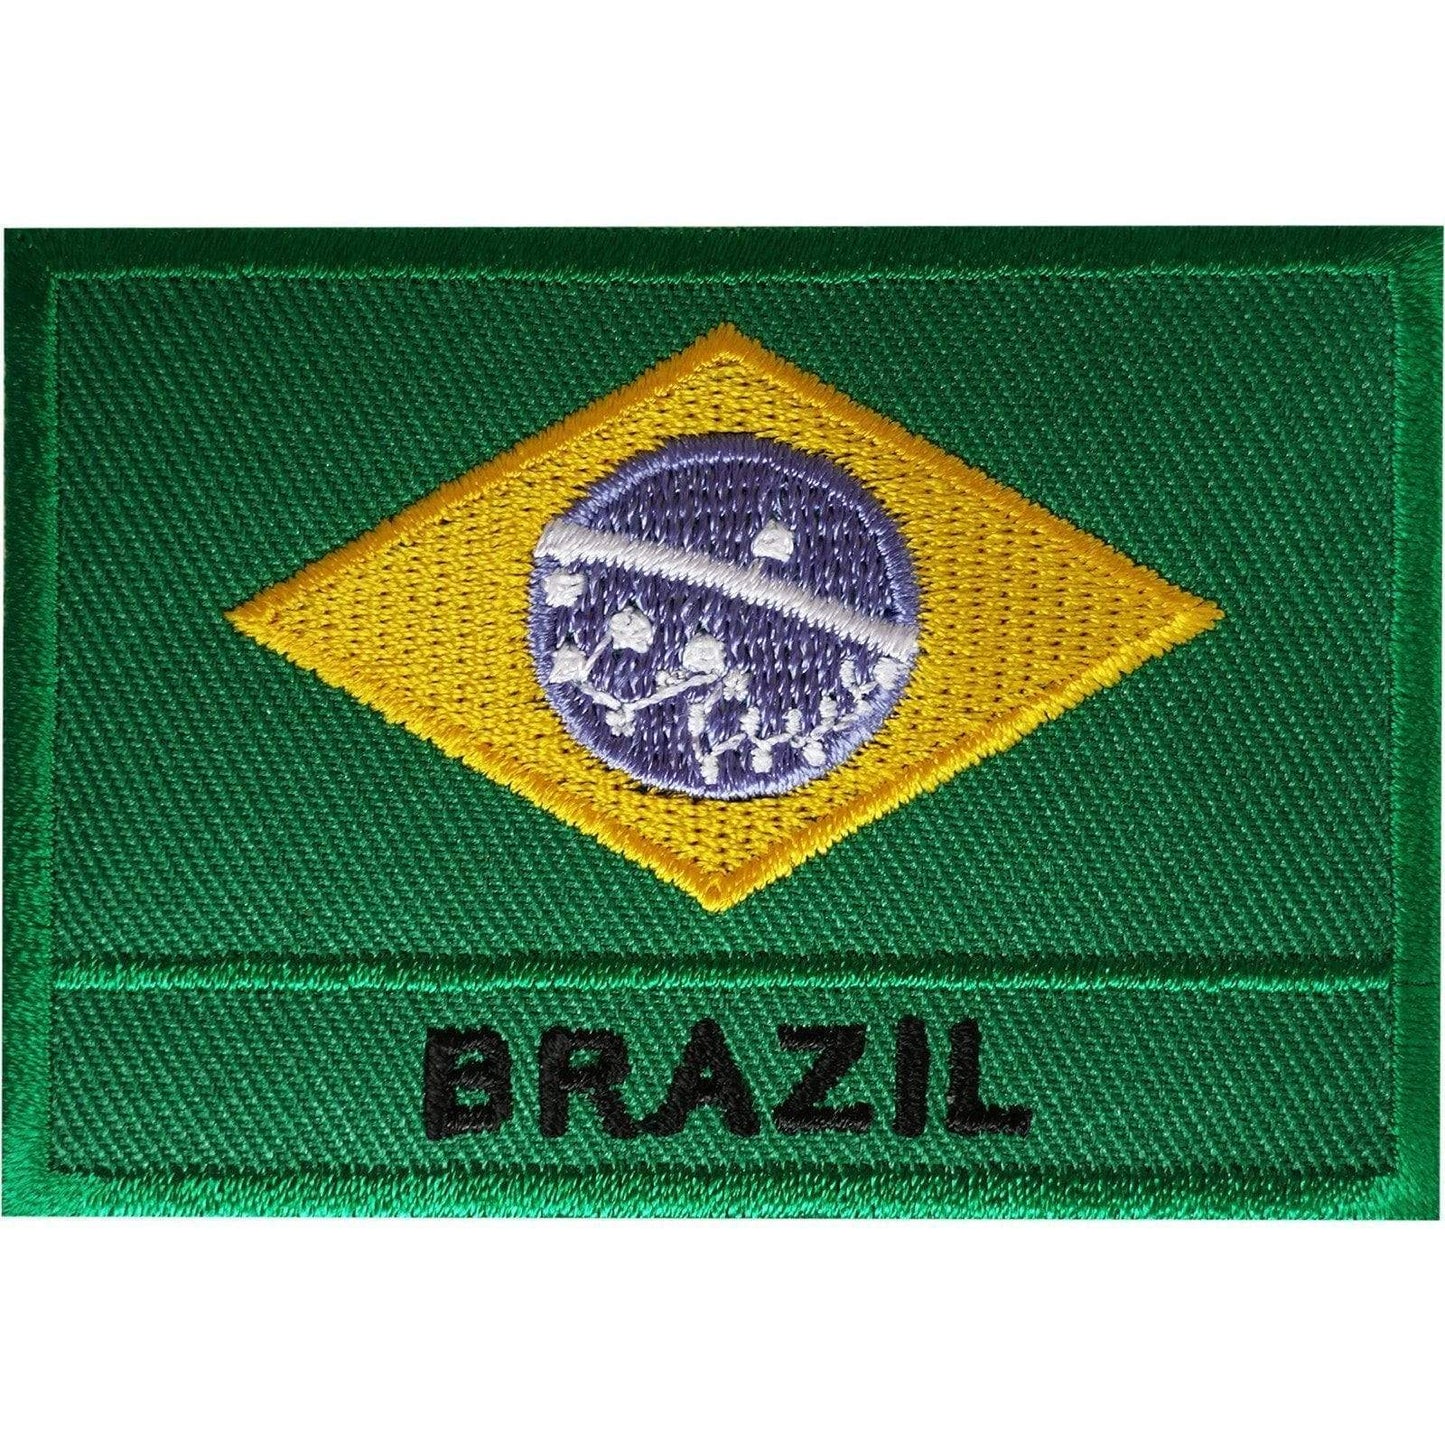 Brazil Flag Patch Embroidered Brazilian Football Badge Iron Sew On Clothes Bag